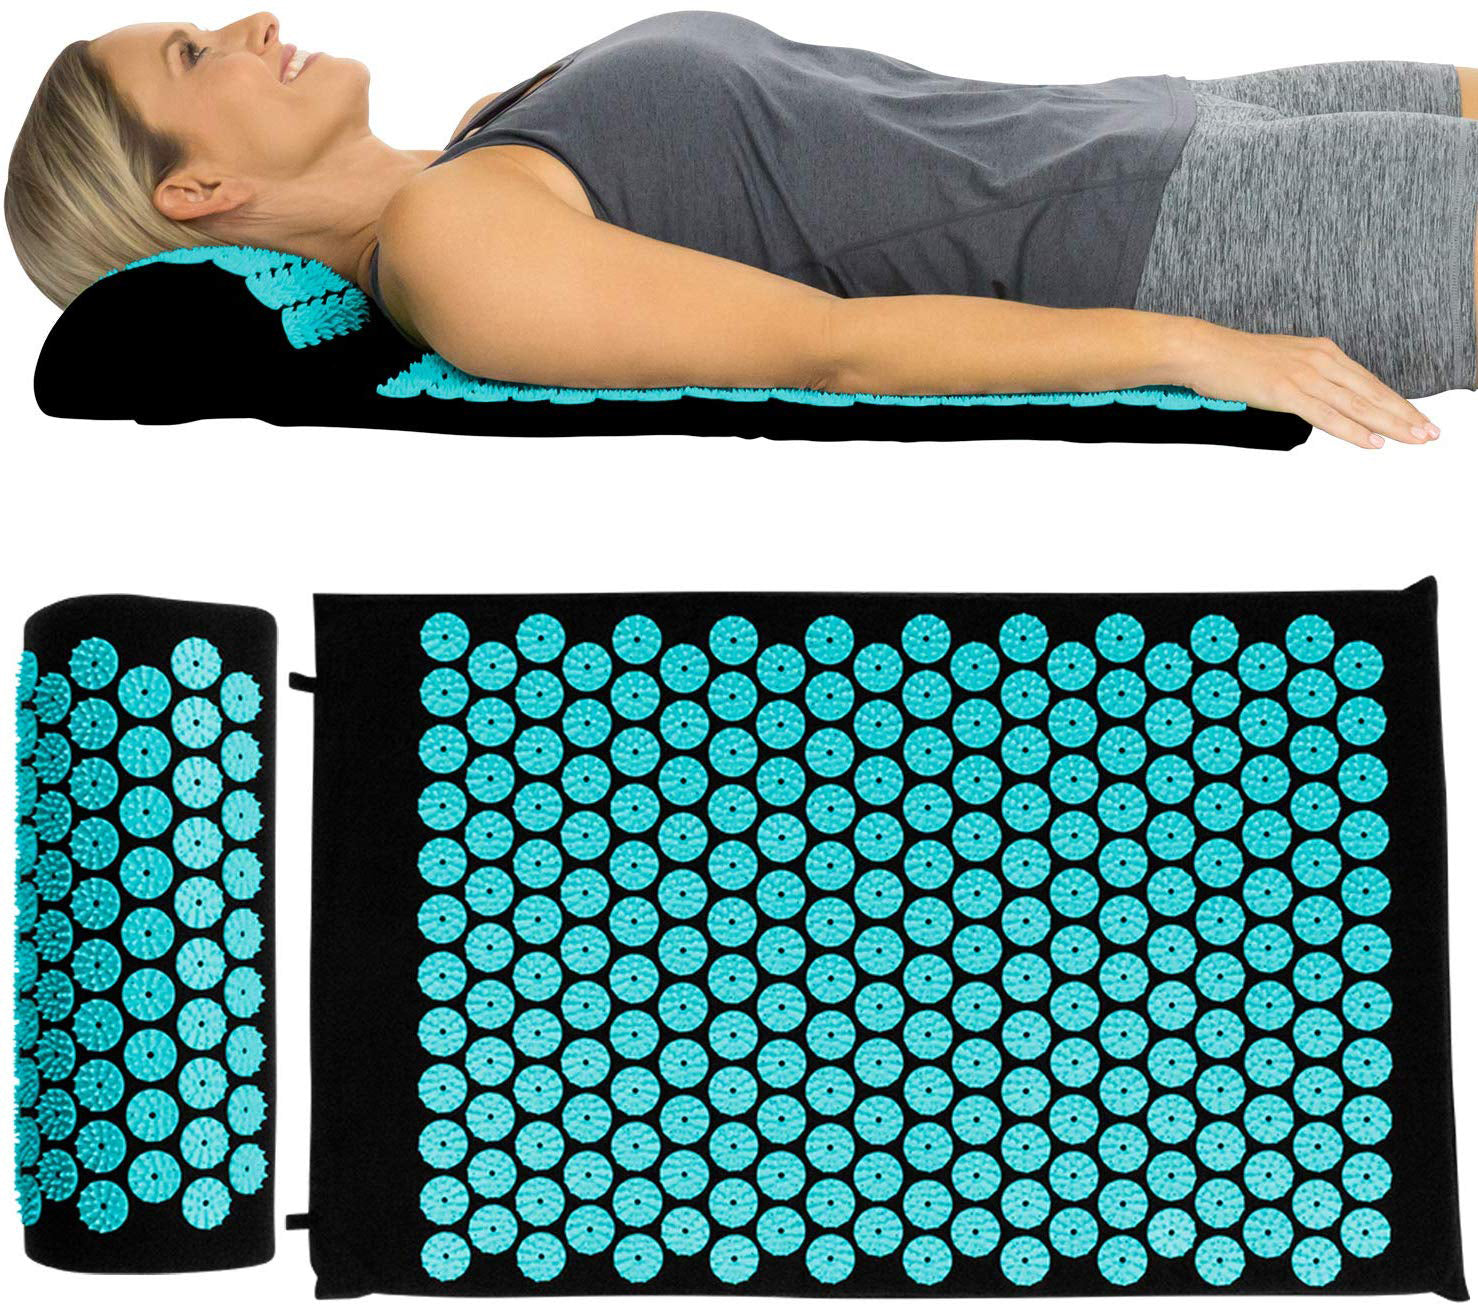 The Ancient Bed of Nails Theory: Why Acupressure Works – Yogi Bare